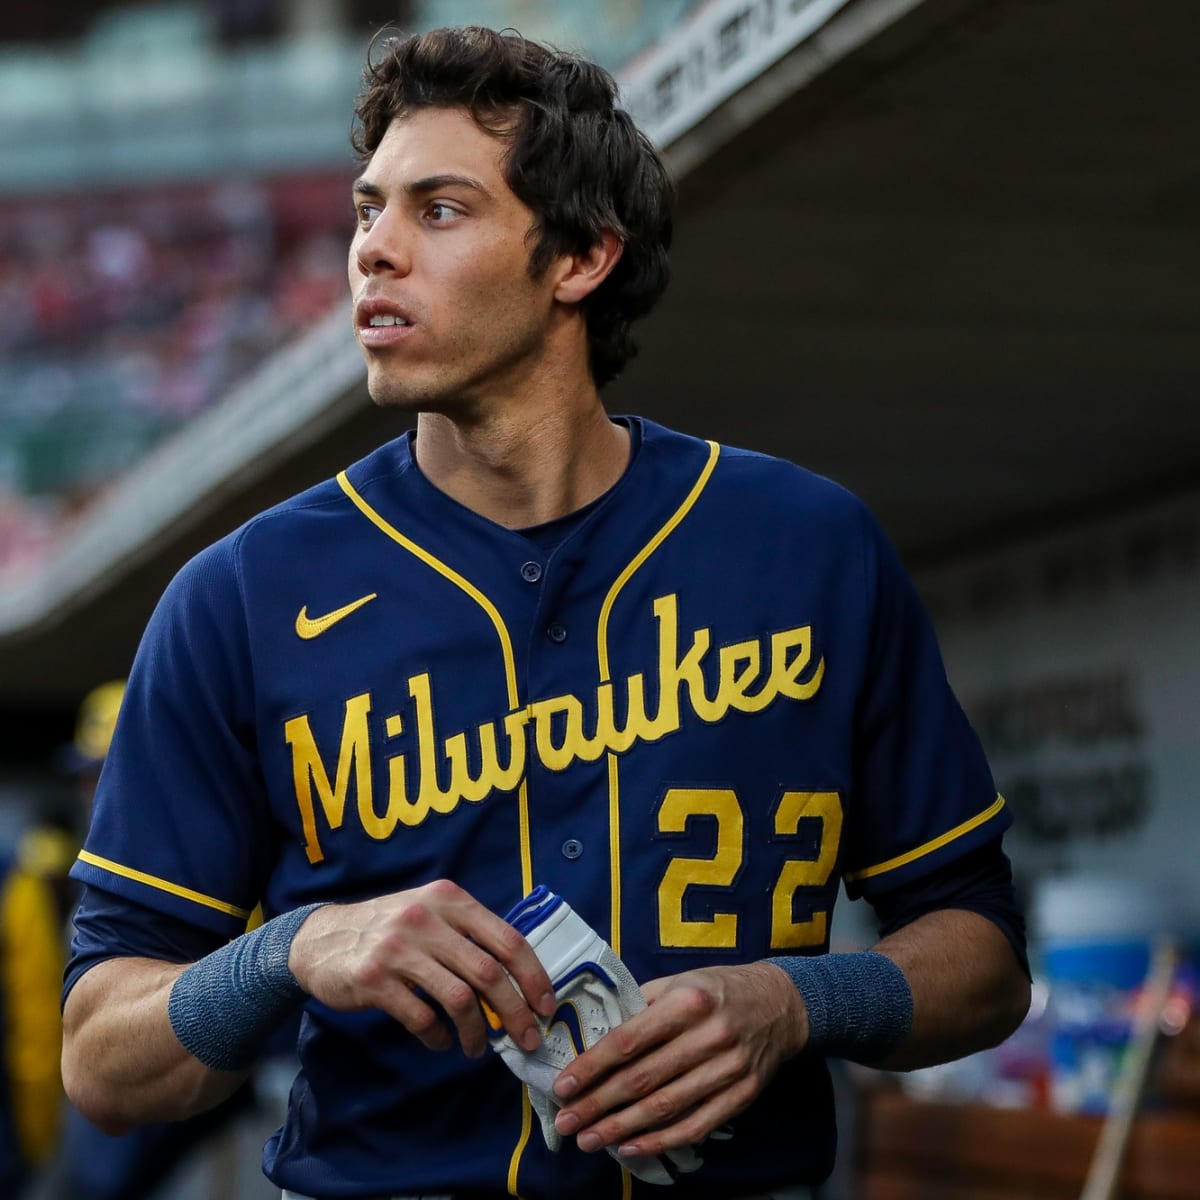 brewers 22 jersey